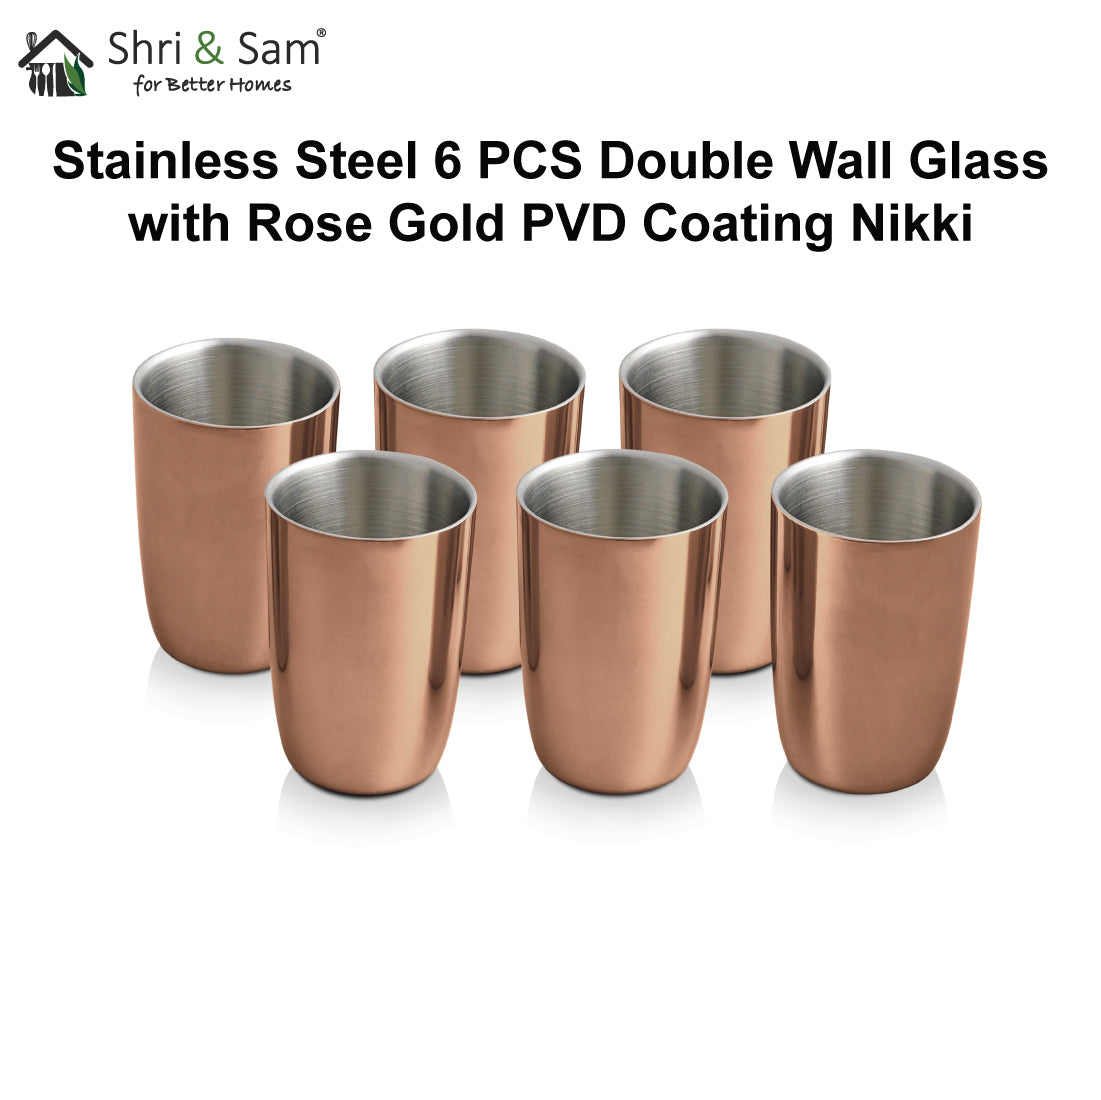 Stainless Steel 6 PCS Double Wall Glass with Rose Gold PVD Coating Nikki